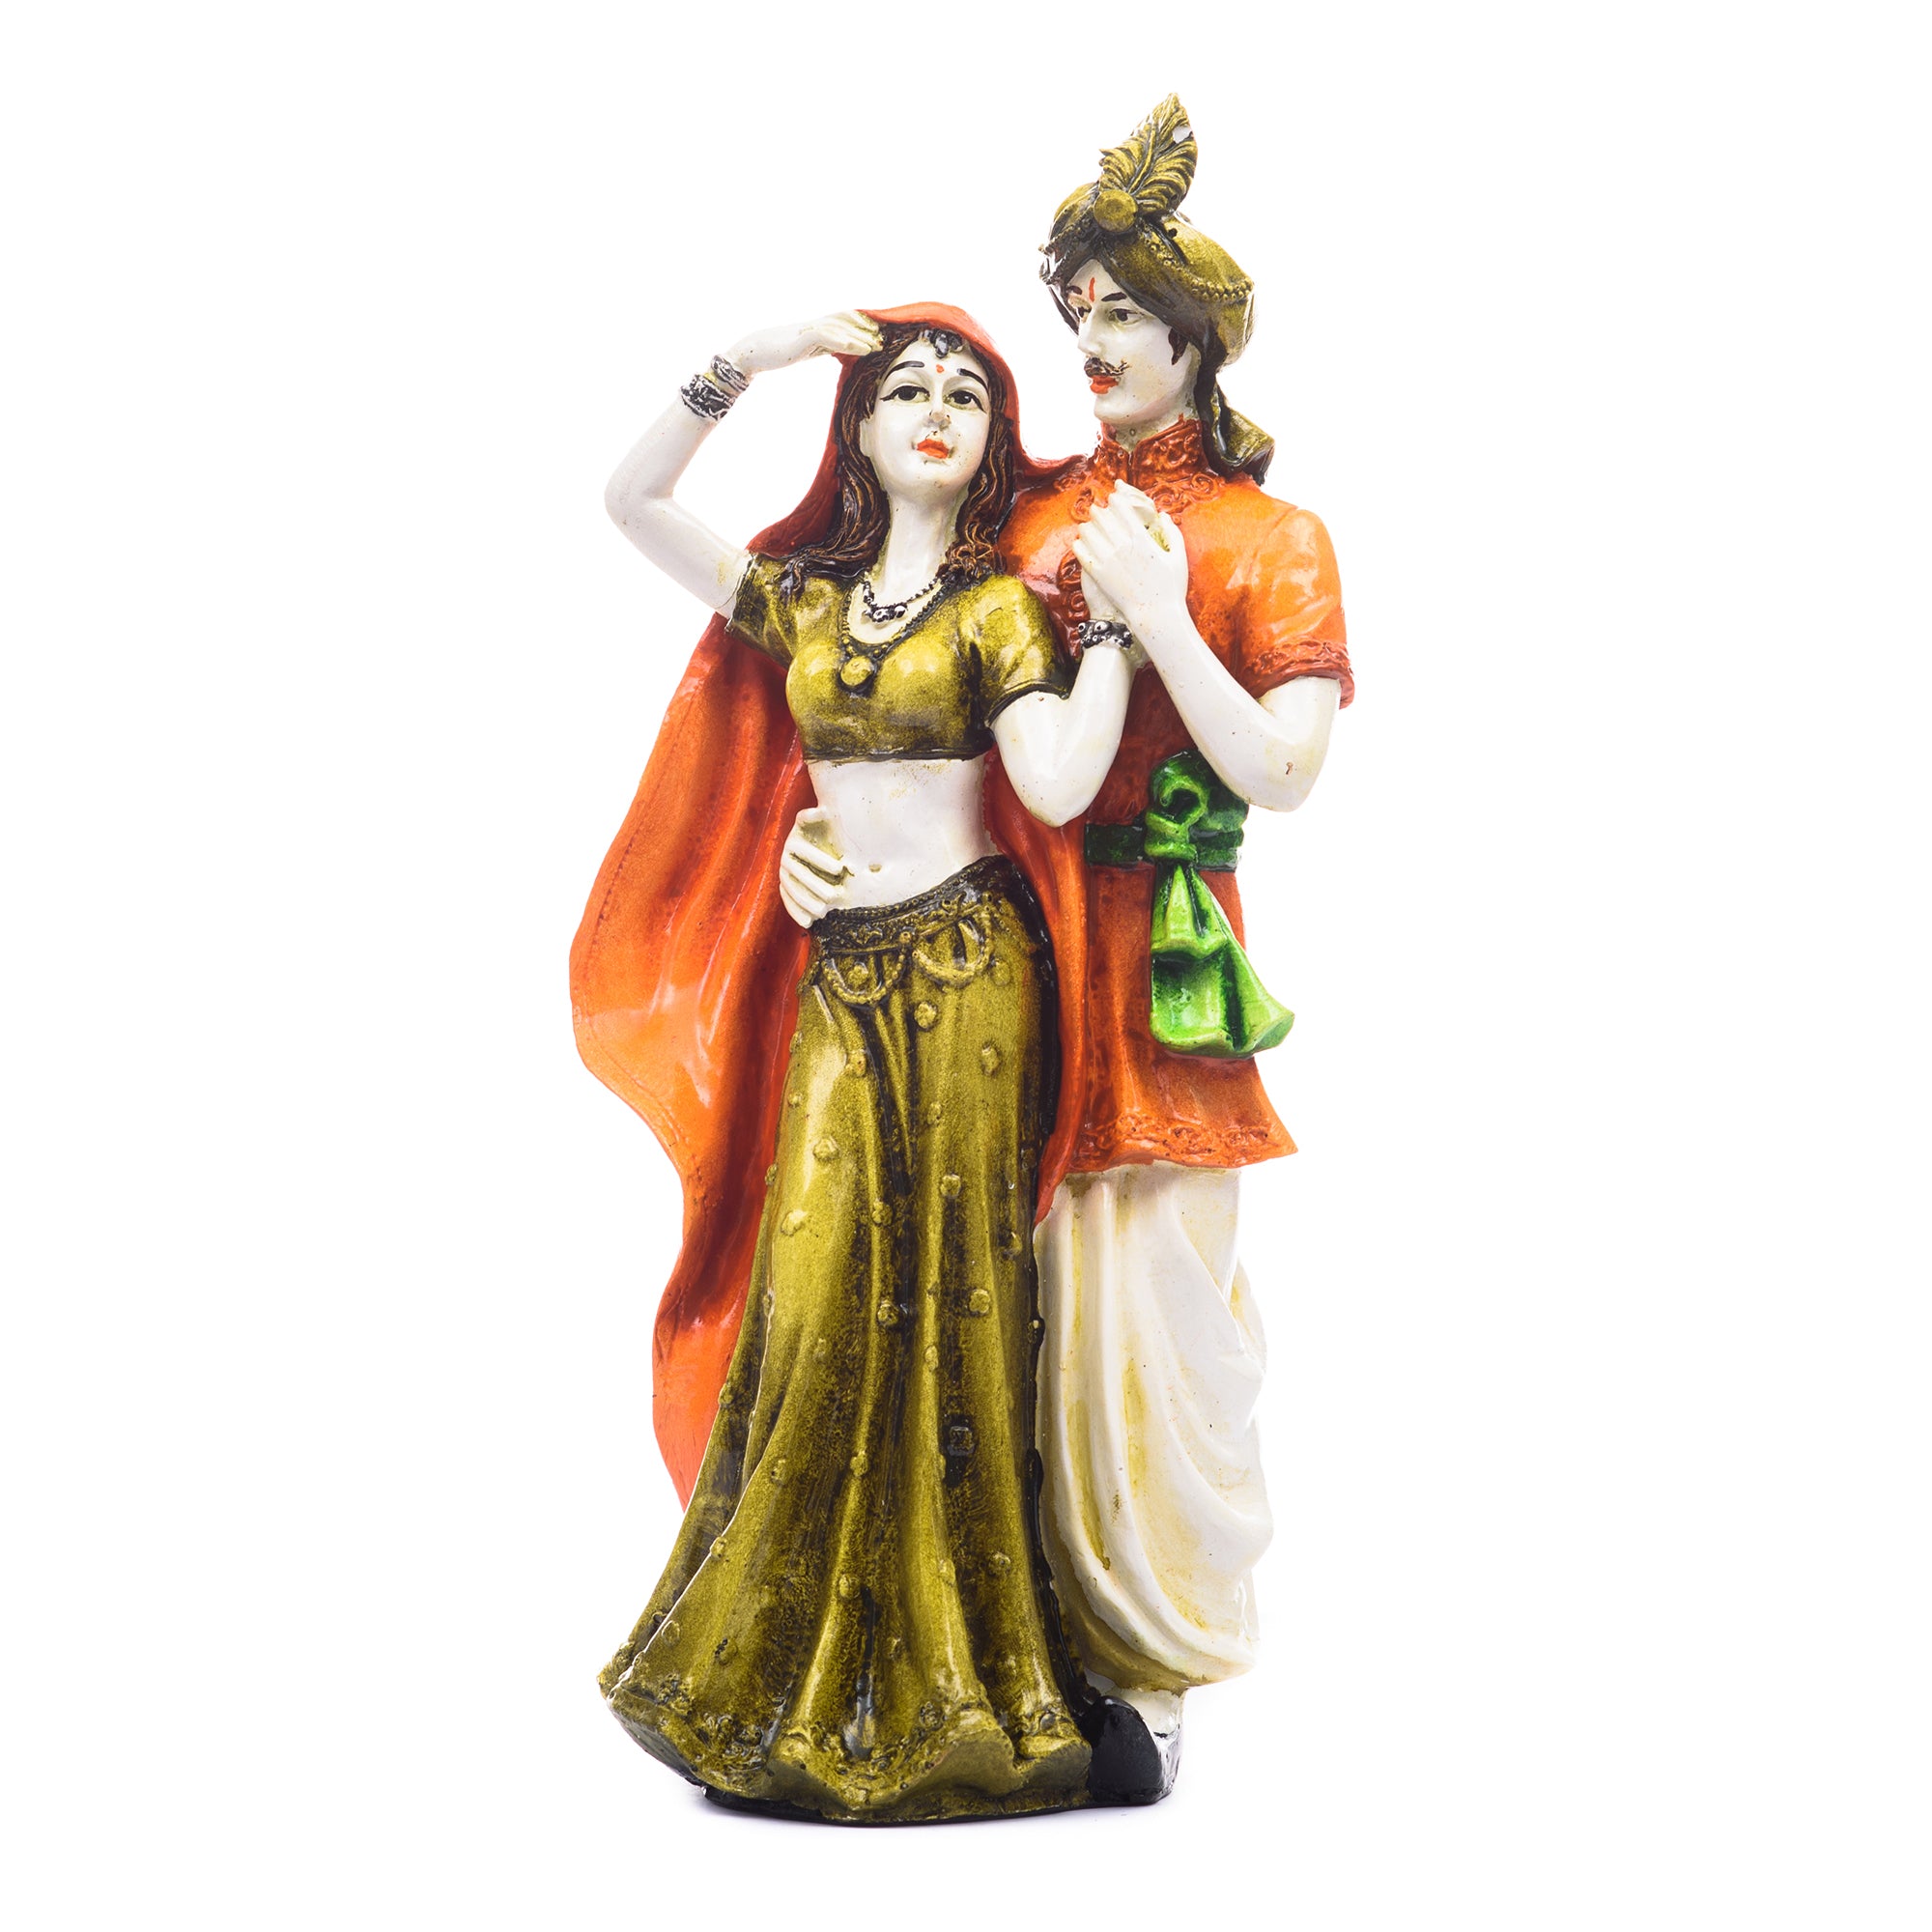 Polyresin Rajasthani Man And Women Statue Handcrafted Human Figurines Decorative Showpiece